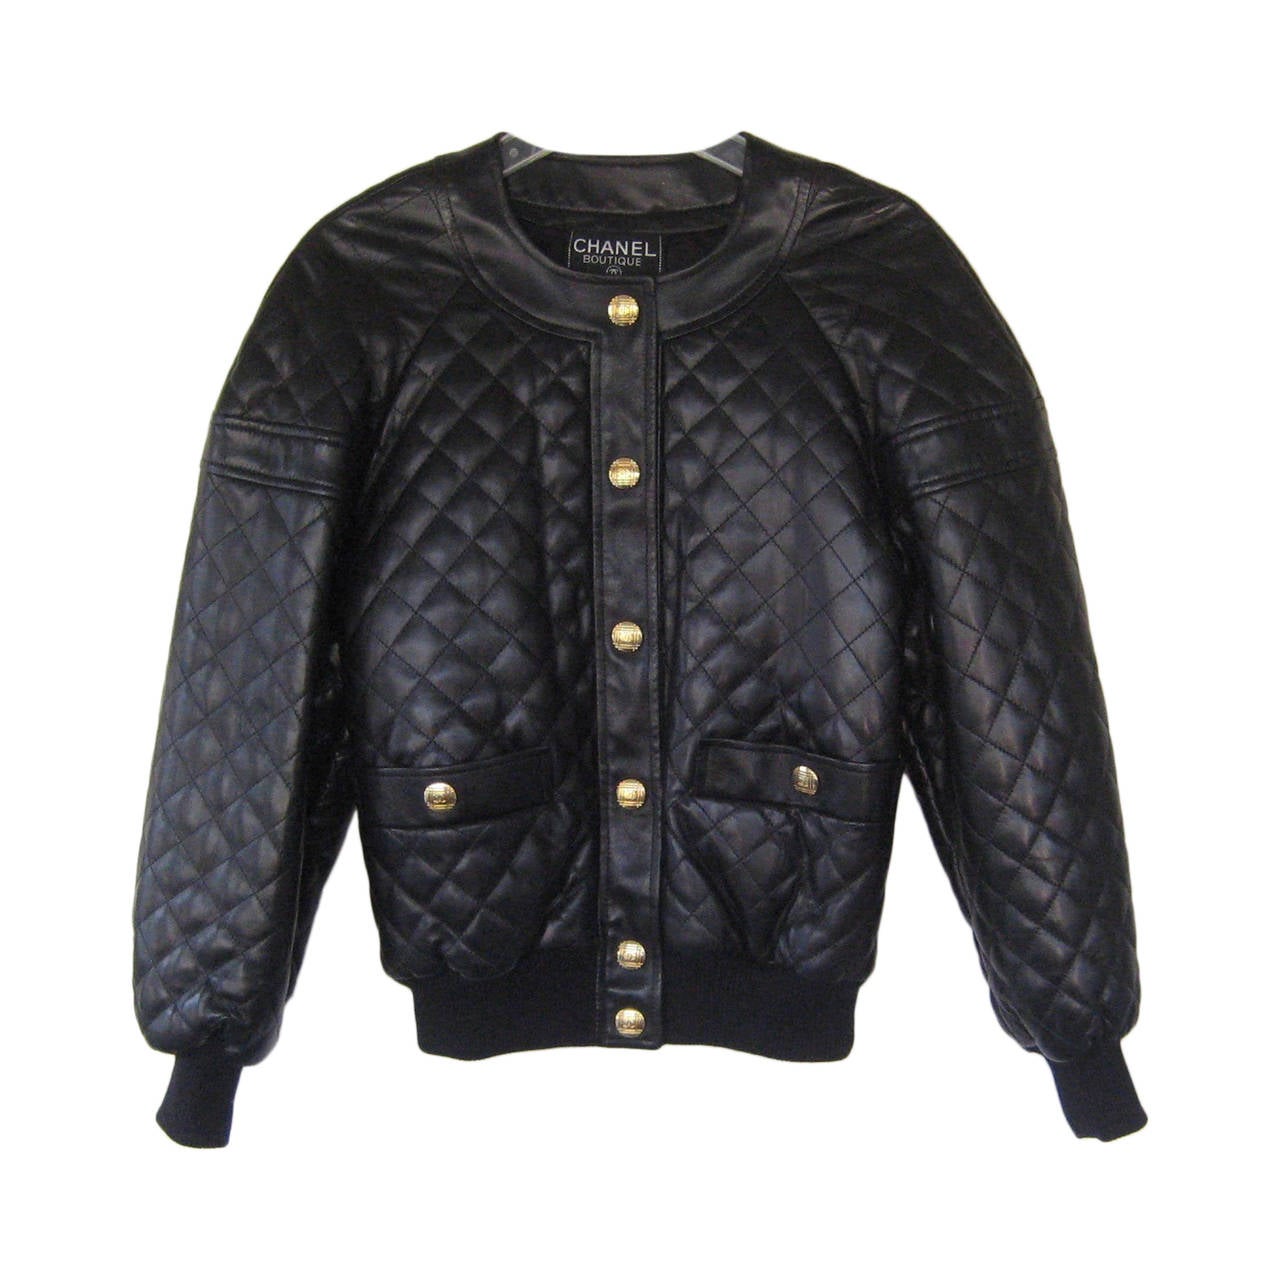 1990s Chanel Quilted Black Leather Bomber Jacket